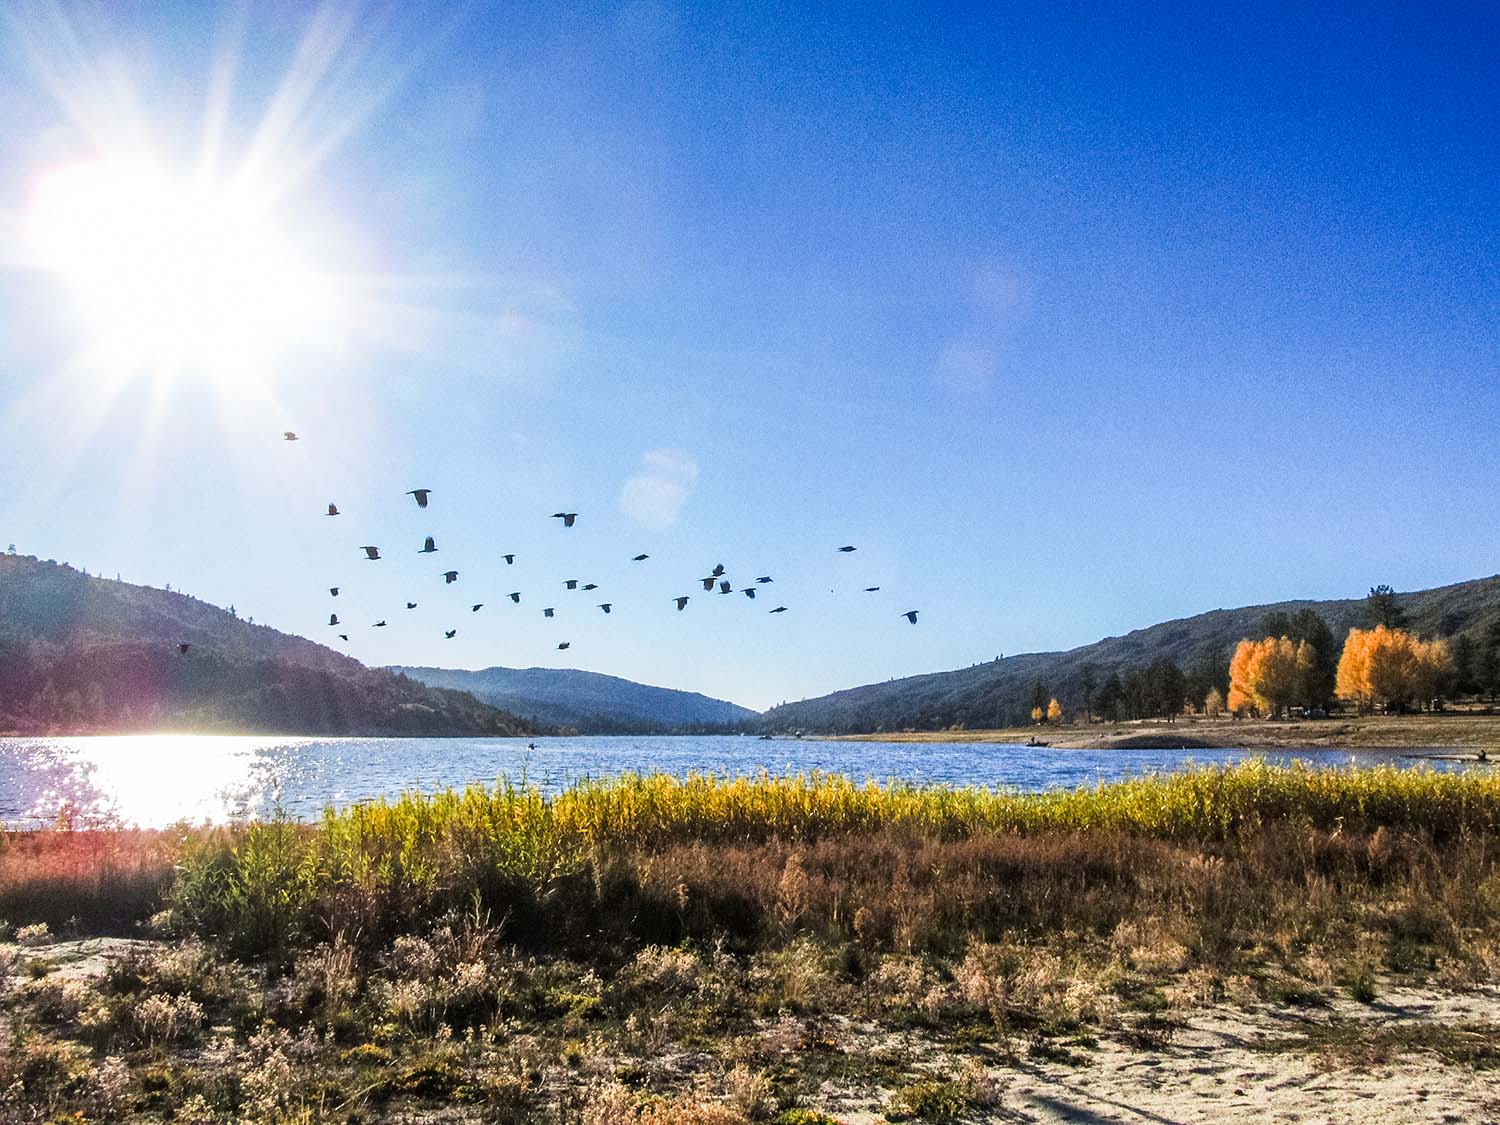 A flock of bird swooping over a lake during sunrise.